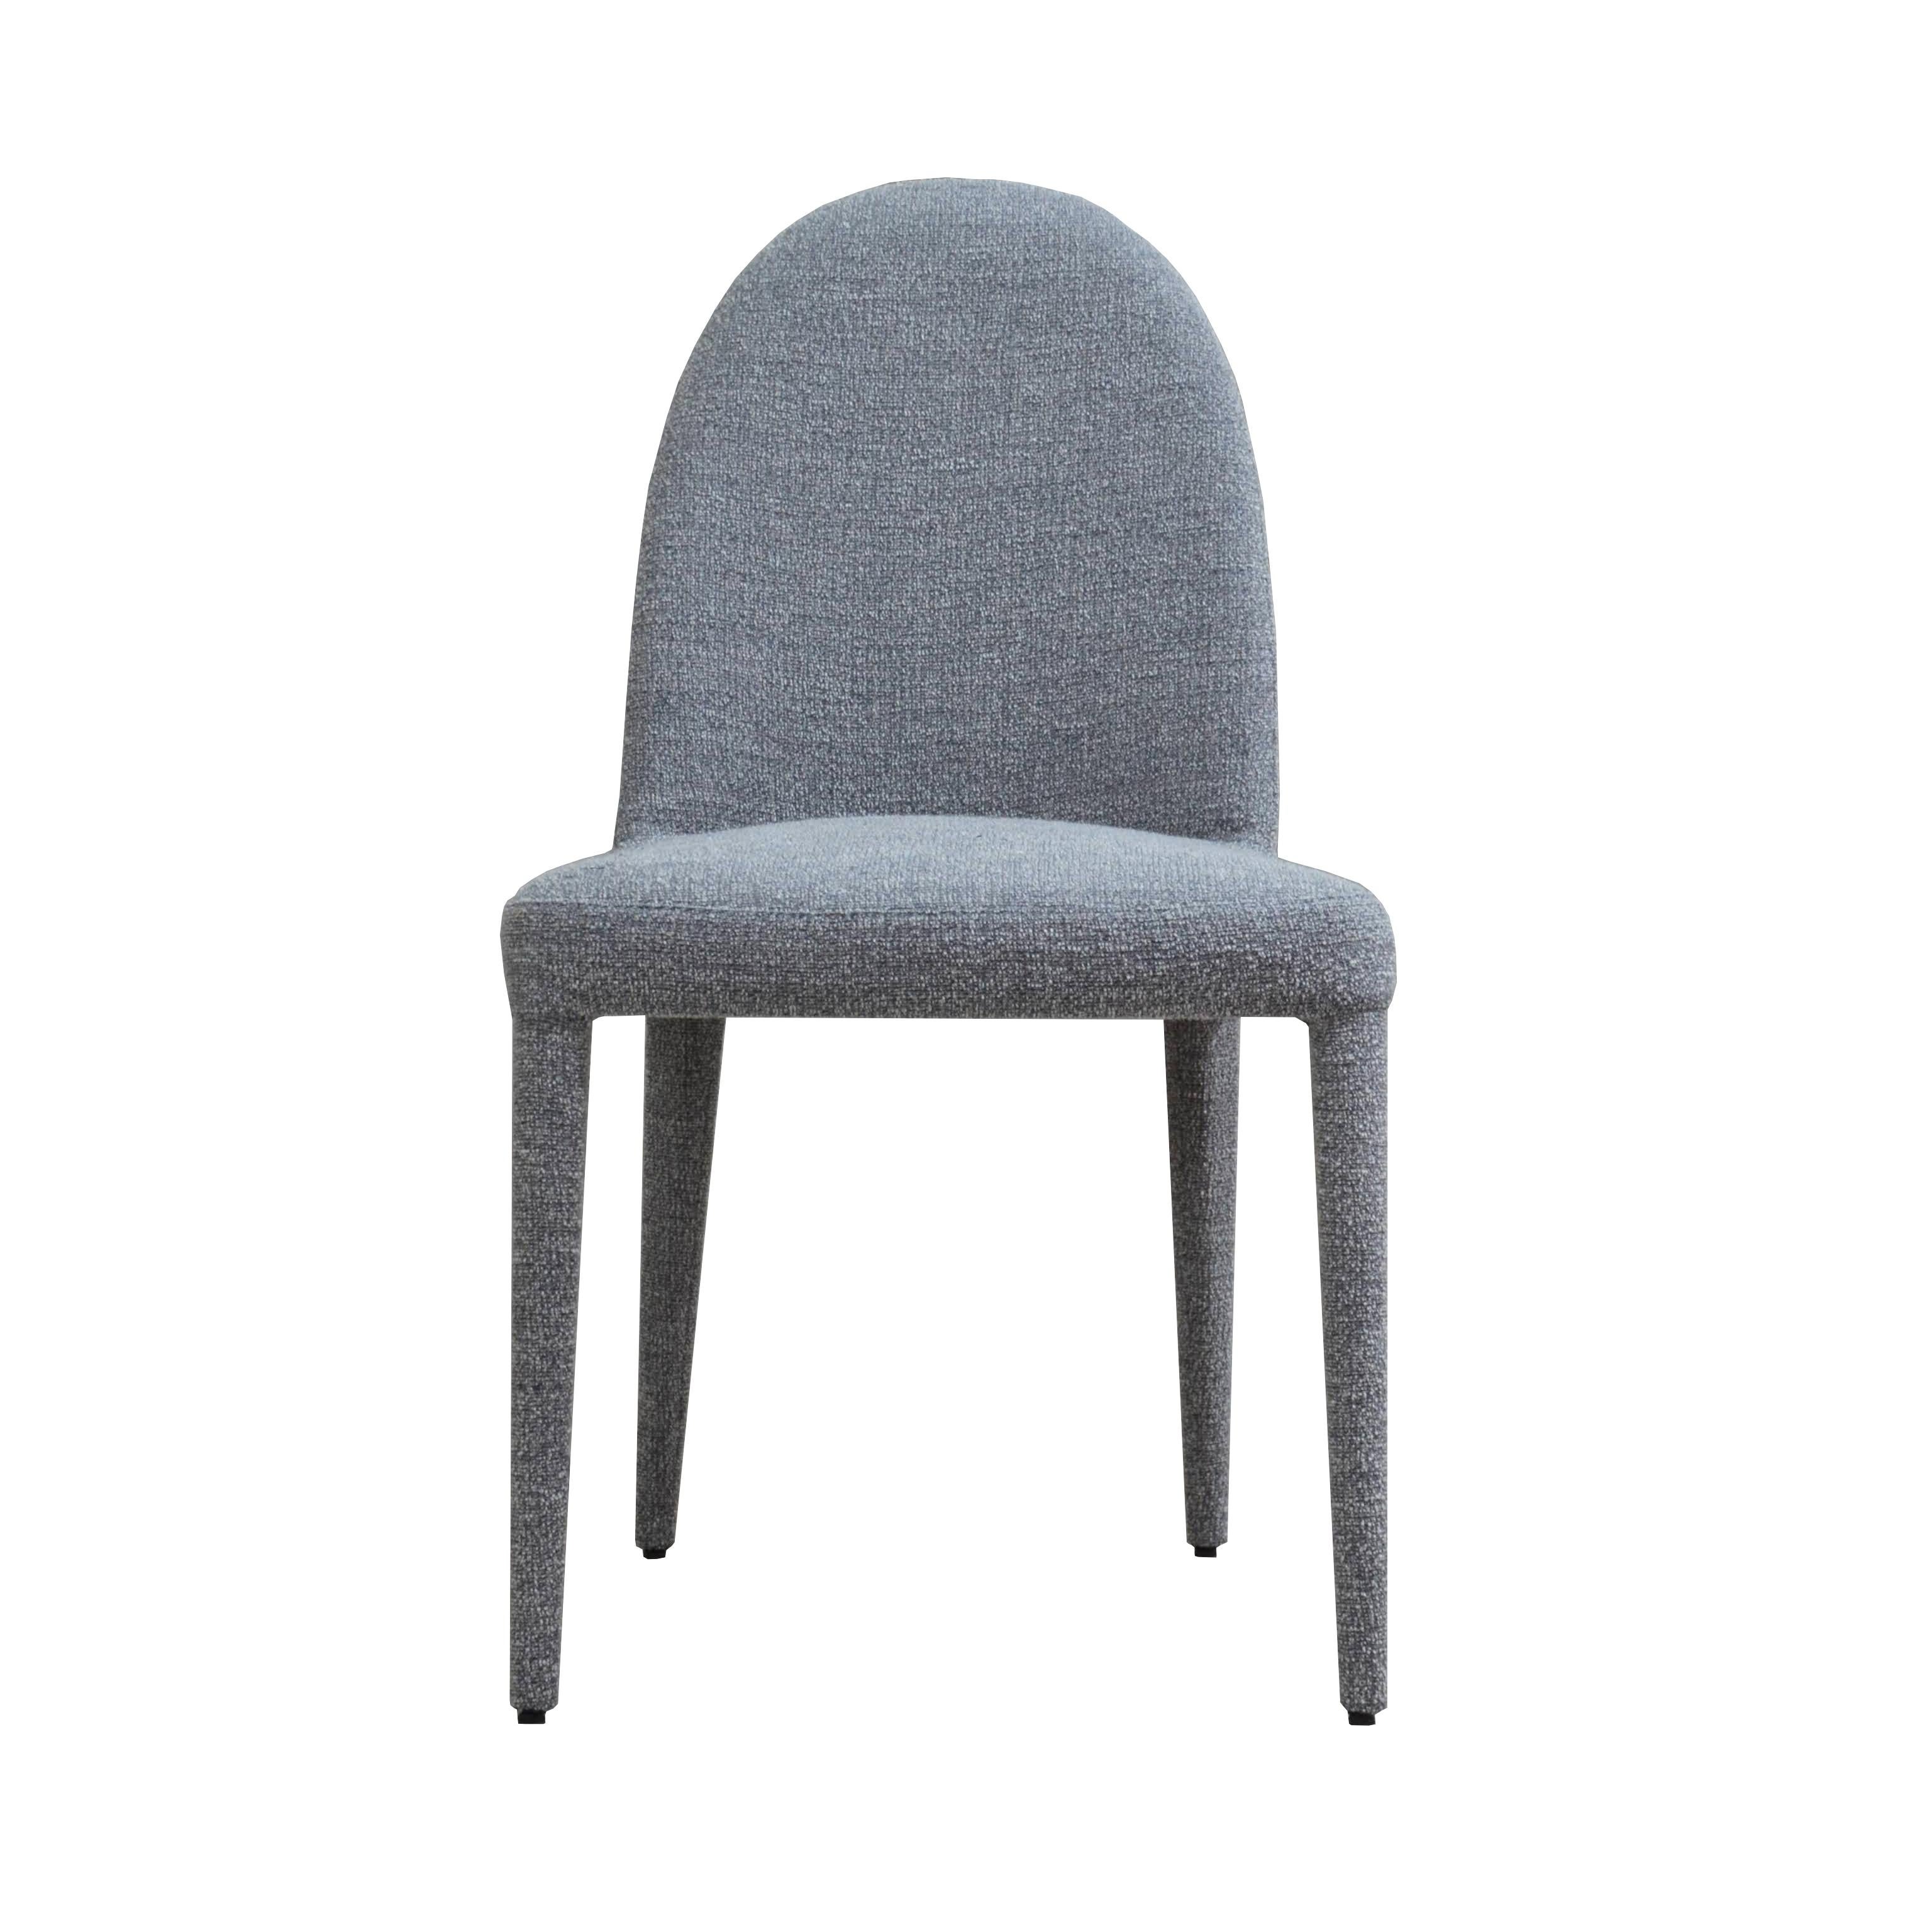 Modern ‘Balzaretti’ Xl Contemporary Upholstered Dining Chair in Grey Fabric For Sale